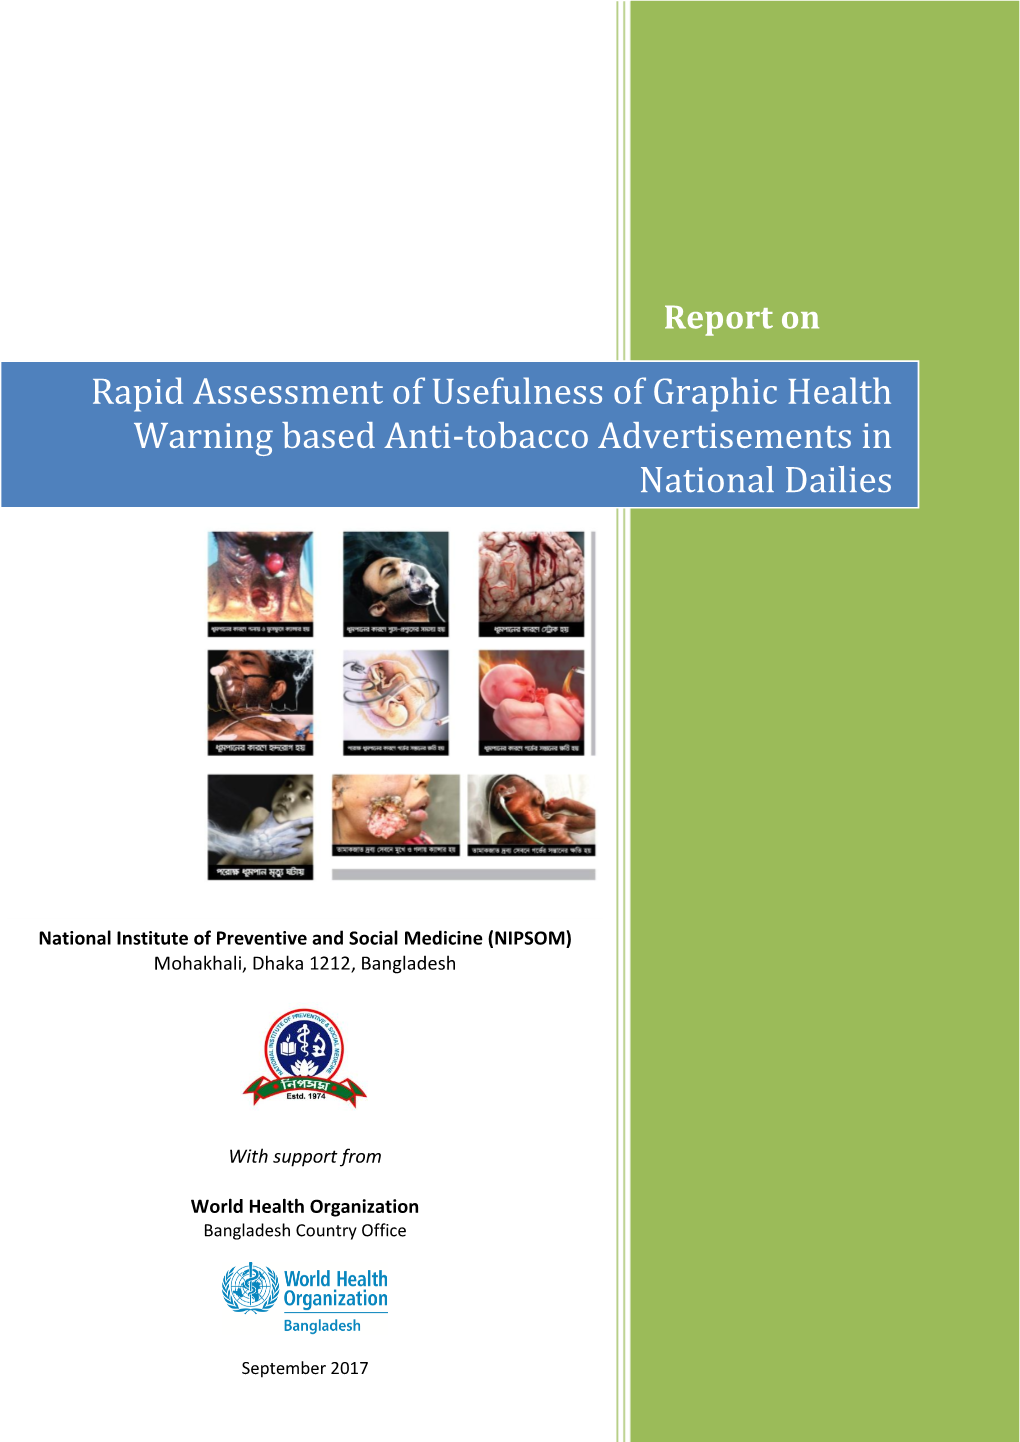 Rapid Assessment of Usefulness of Graphic Health Warning Based Anti-Tobacco Advertisements in National Dailies